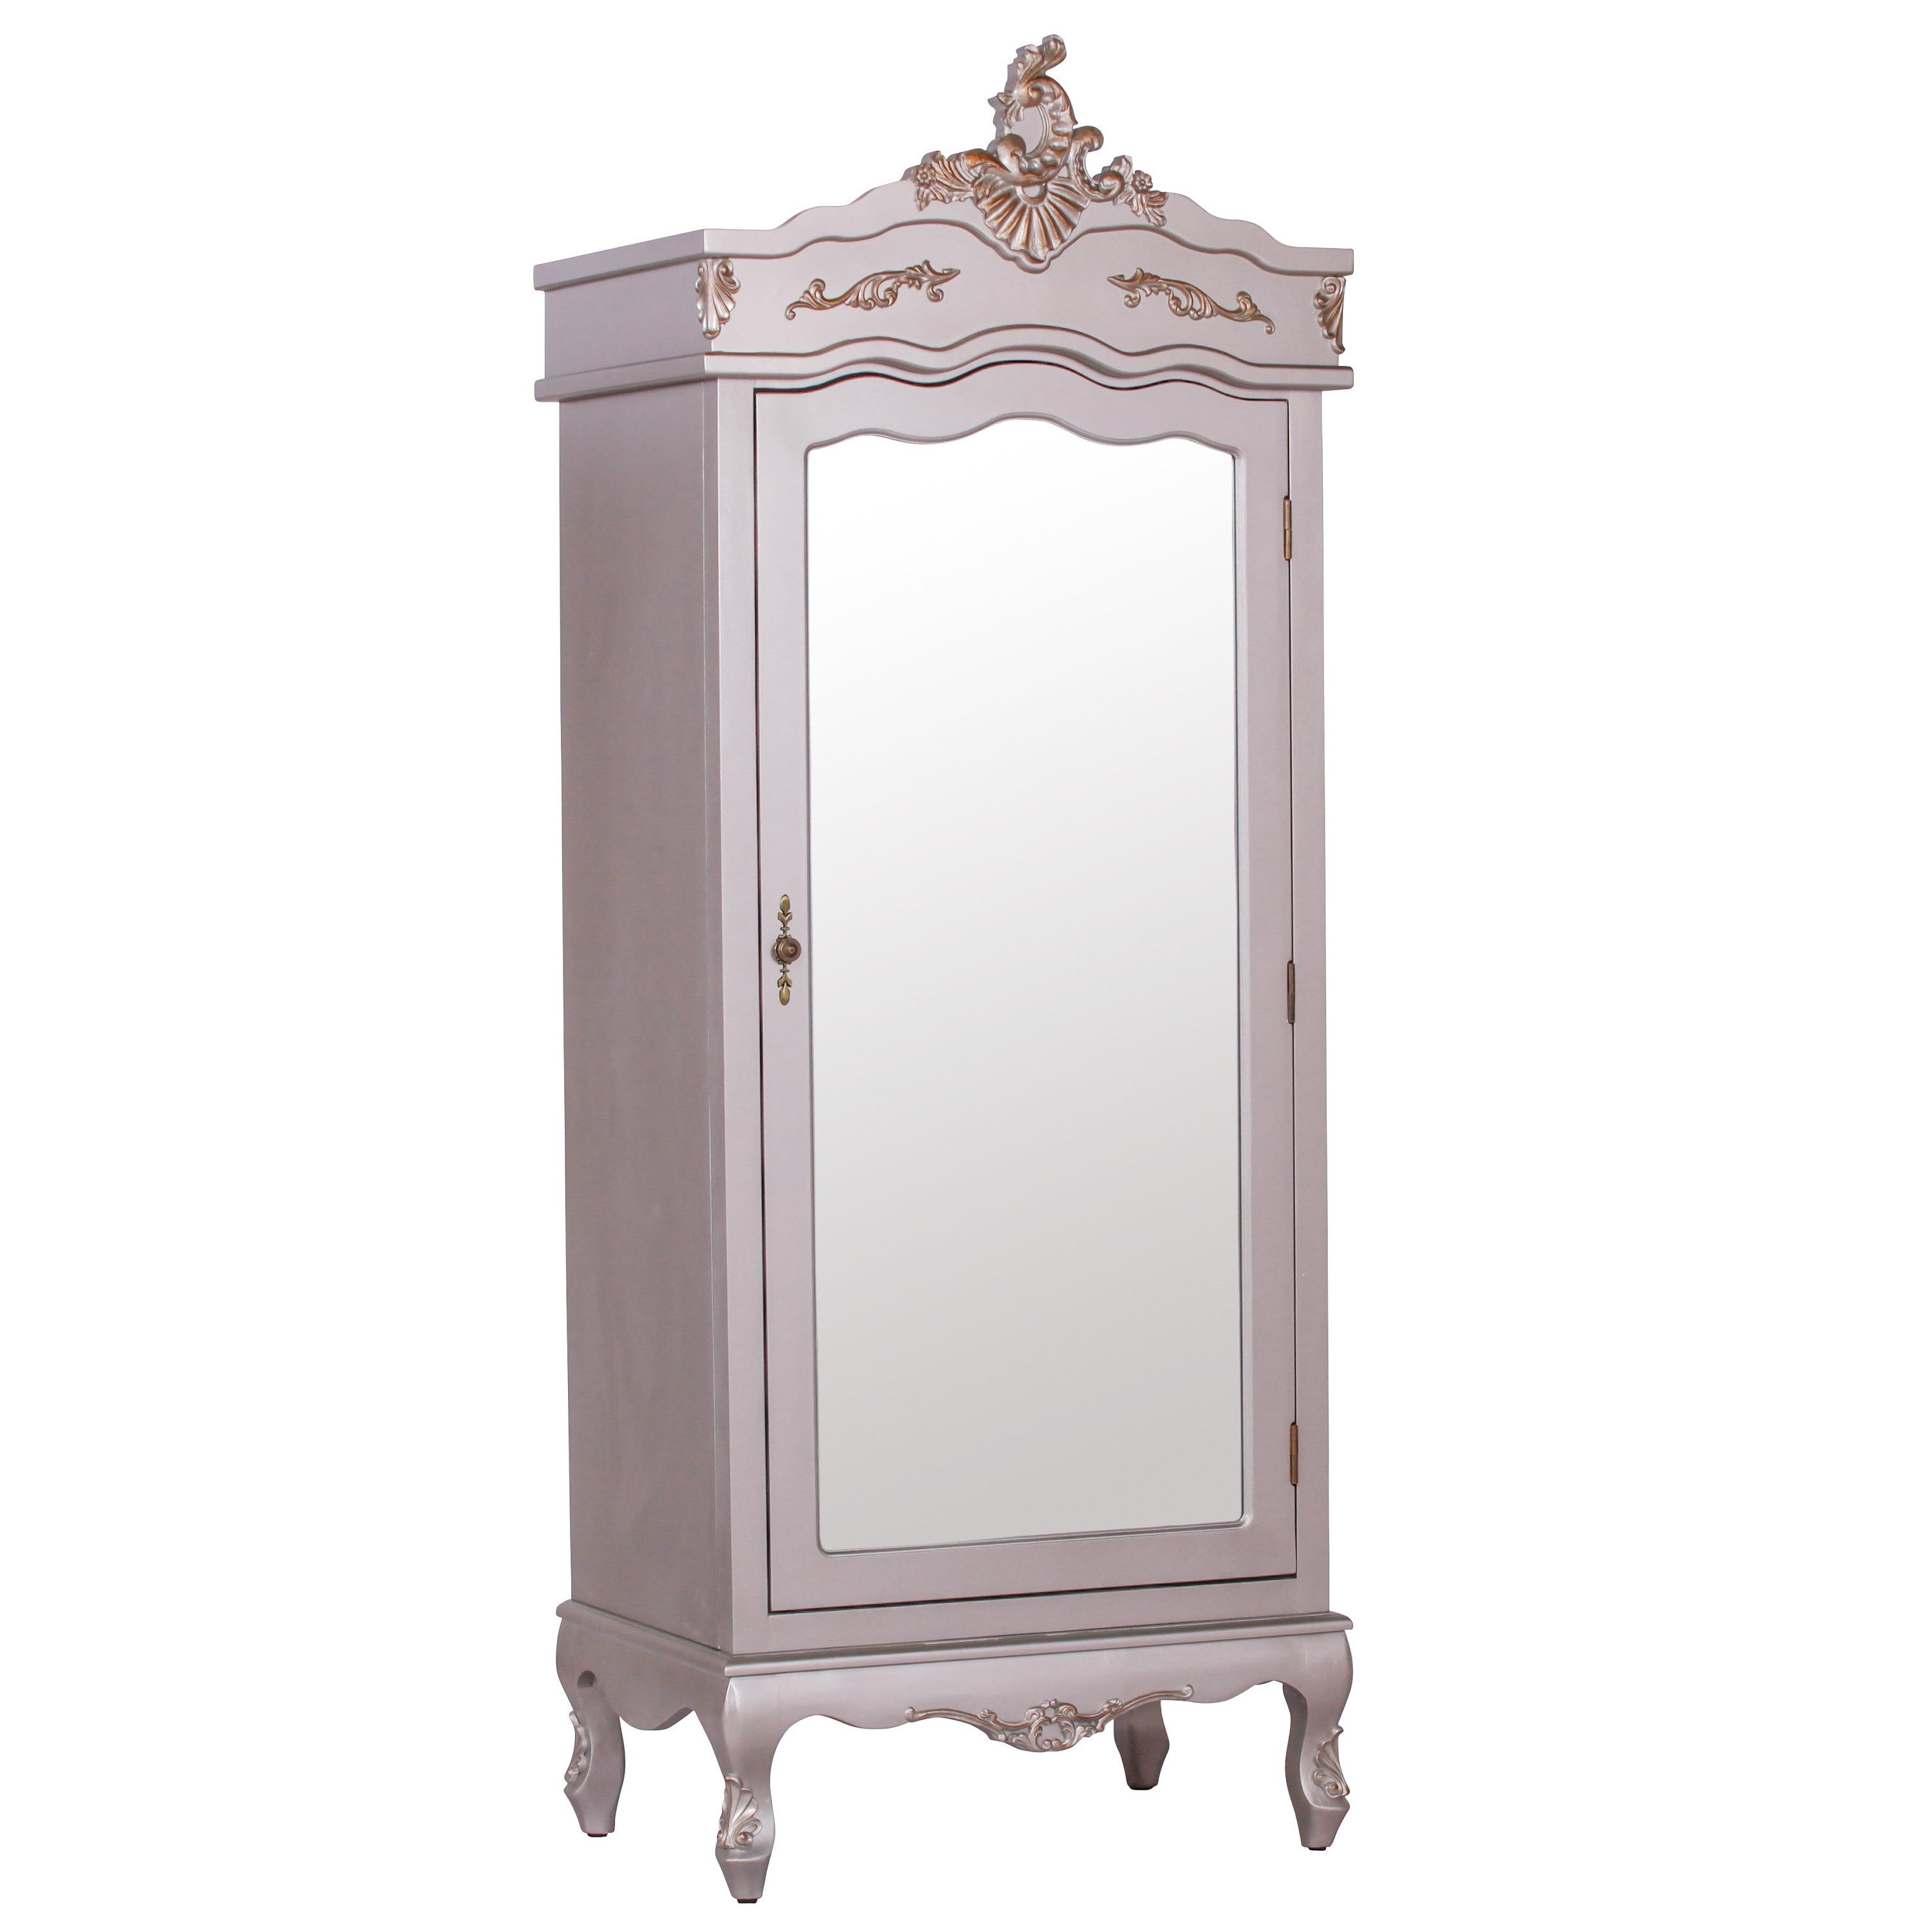 Antique French Style Full Mirror Single Door Armoire Wardrobe – Etsy Uk Throughout Single French Wardrobes (Photo 11 of 15)